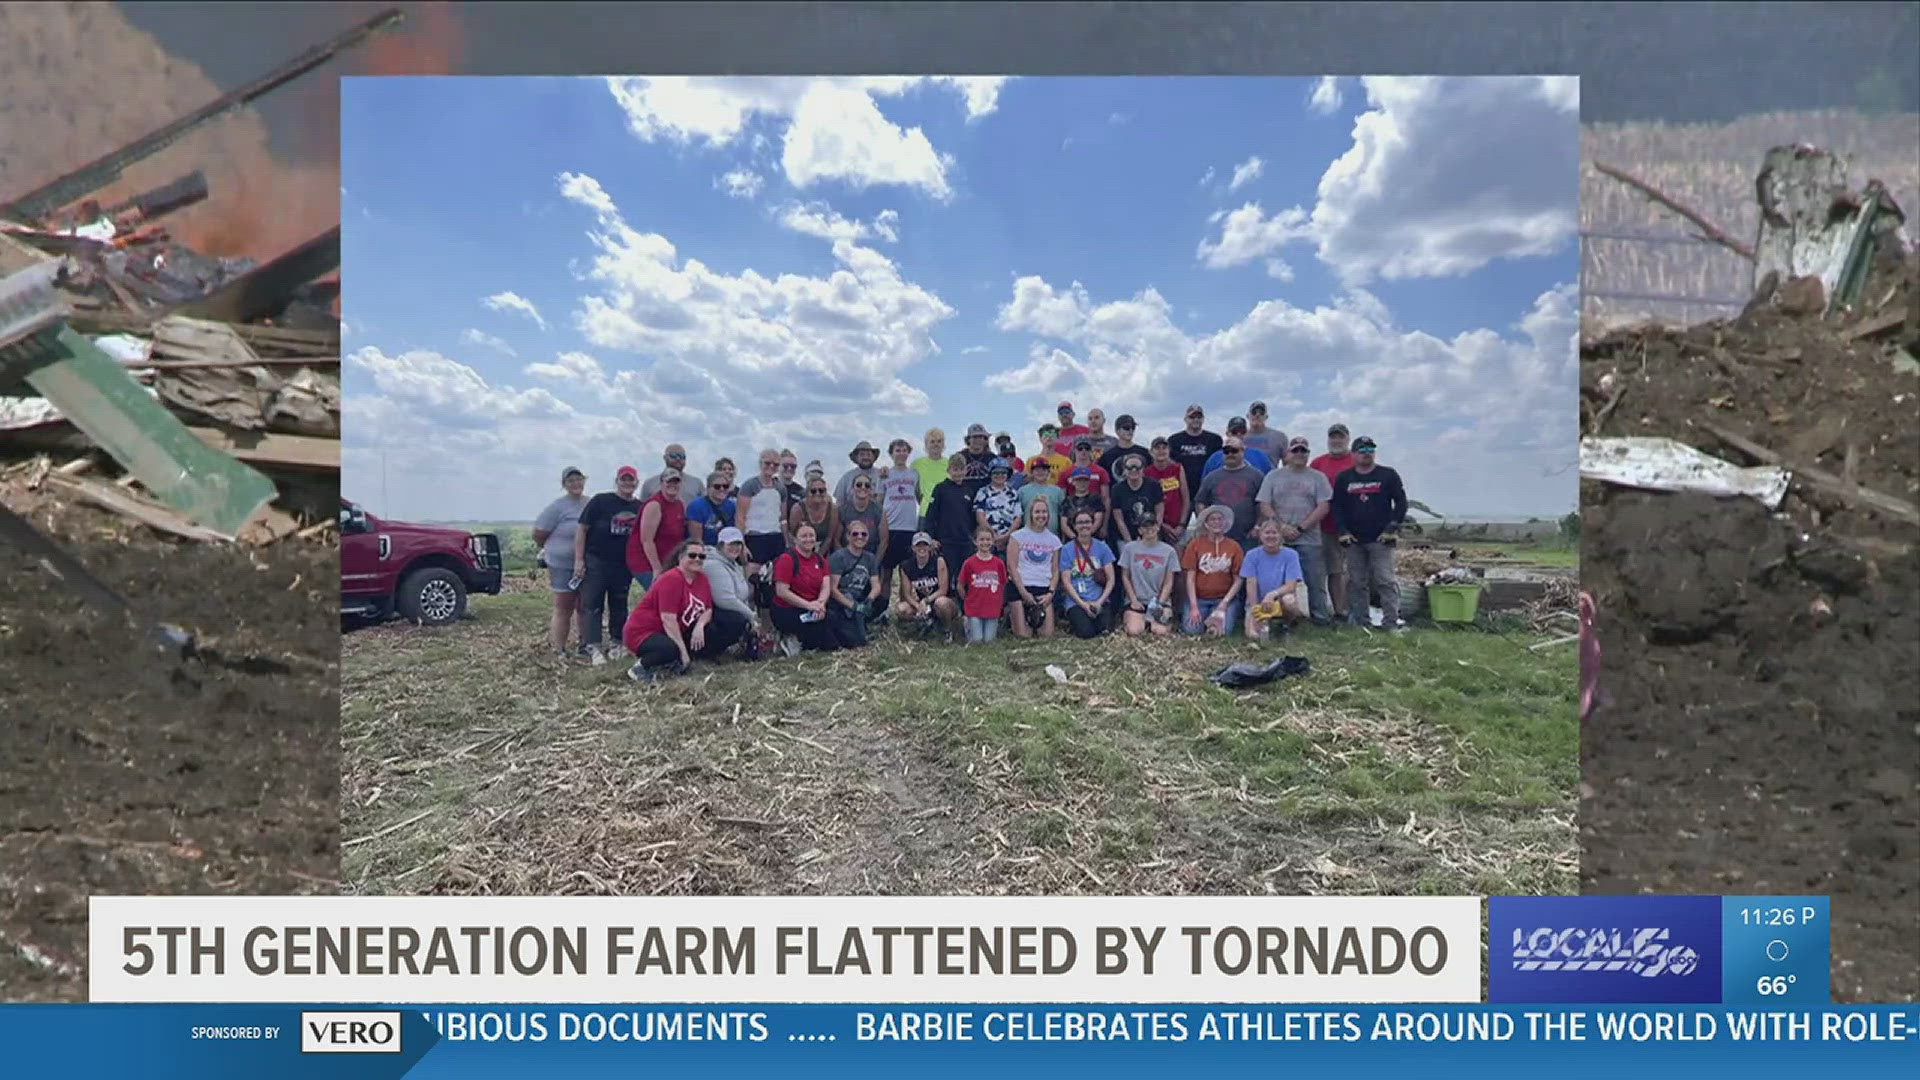 The small community of Greenfield, Iowa, is reeling after an "at least" EF-3 tornado came through town, injuring 35 and killing 4 people.